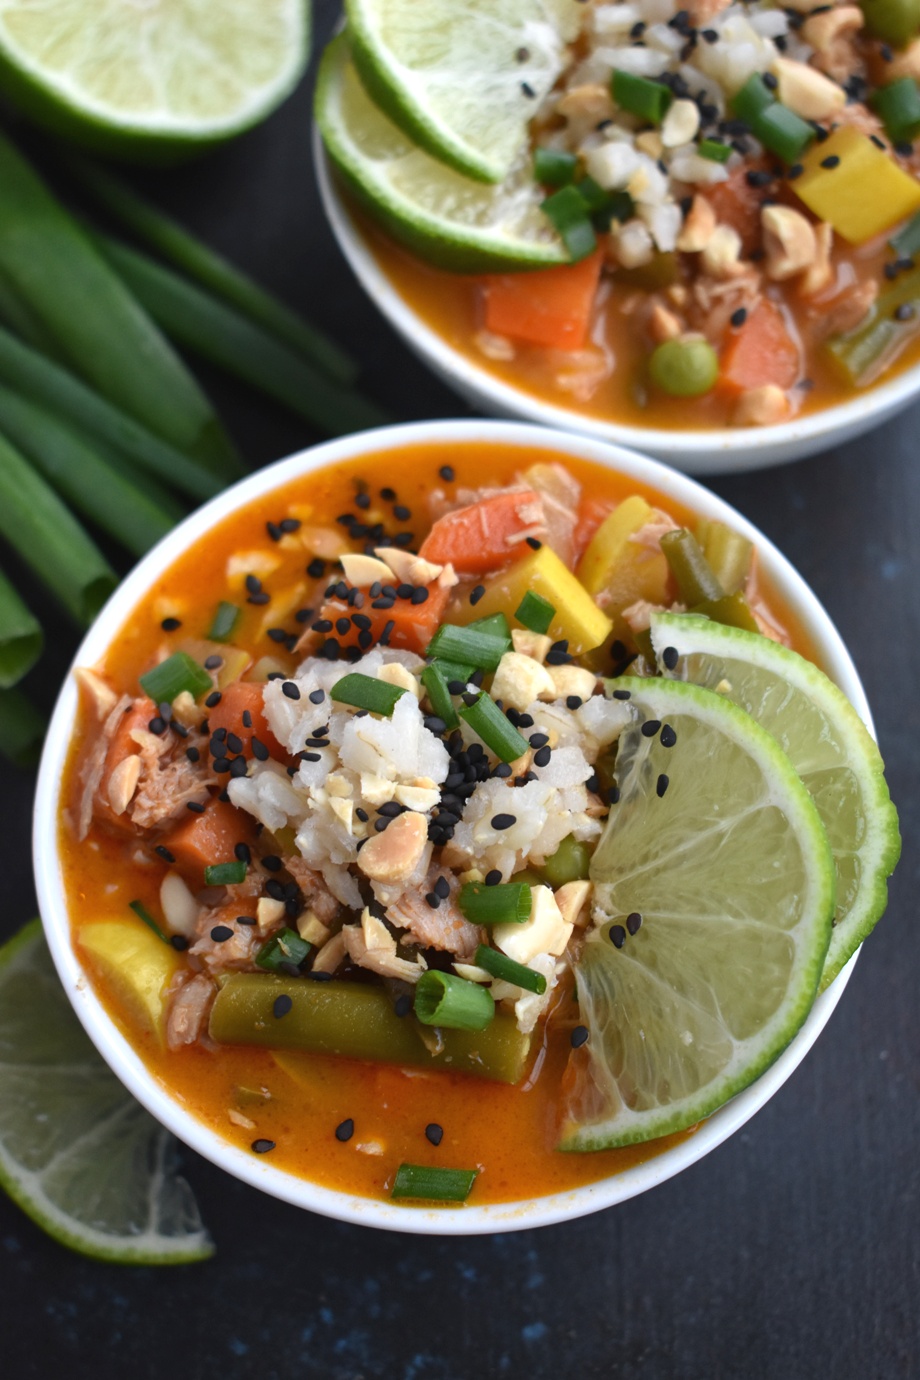 Thai Coconut Curry Soup is loaded with chicken, vegetables, brown rice and a Thai coconut curry broth. It is loaded with protein, vitamins and is the perfect warming meal ready in 30 minutes!